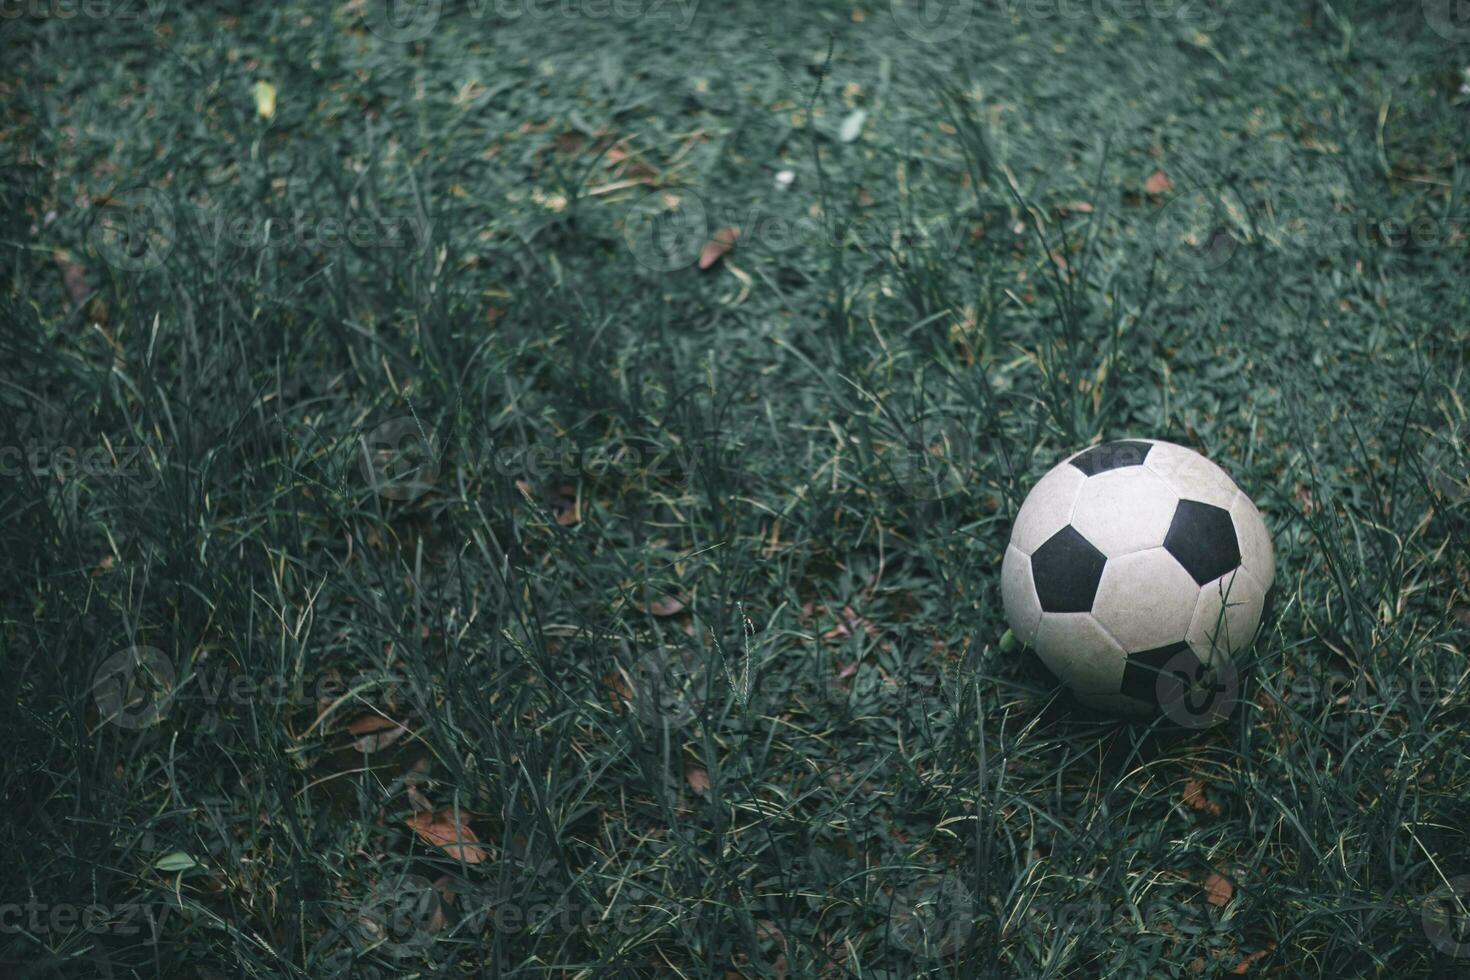 black and white striped soccer ball was placed on grass, used by soccer team to practice on club turf during training before competing. soccer ball is set against dark background of grass field. photo